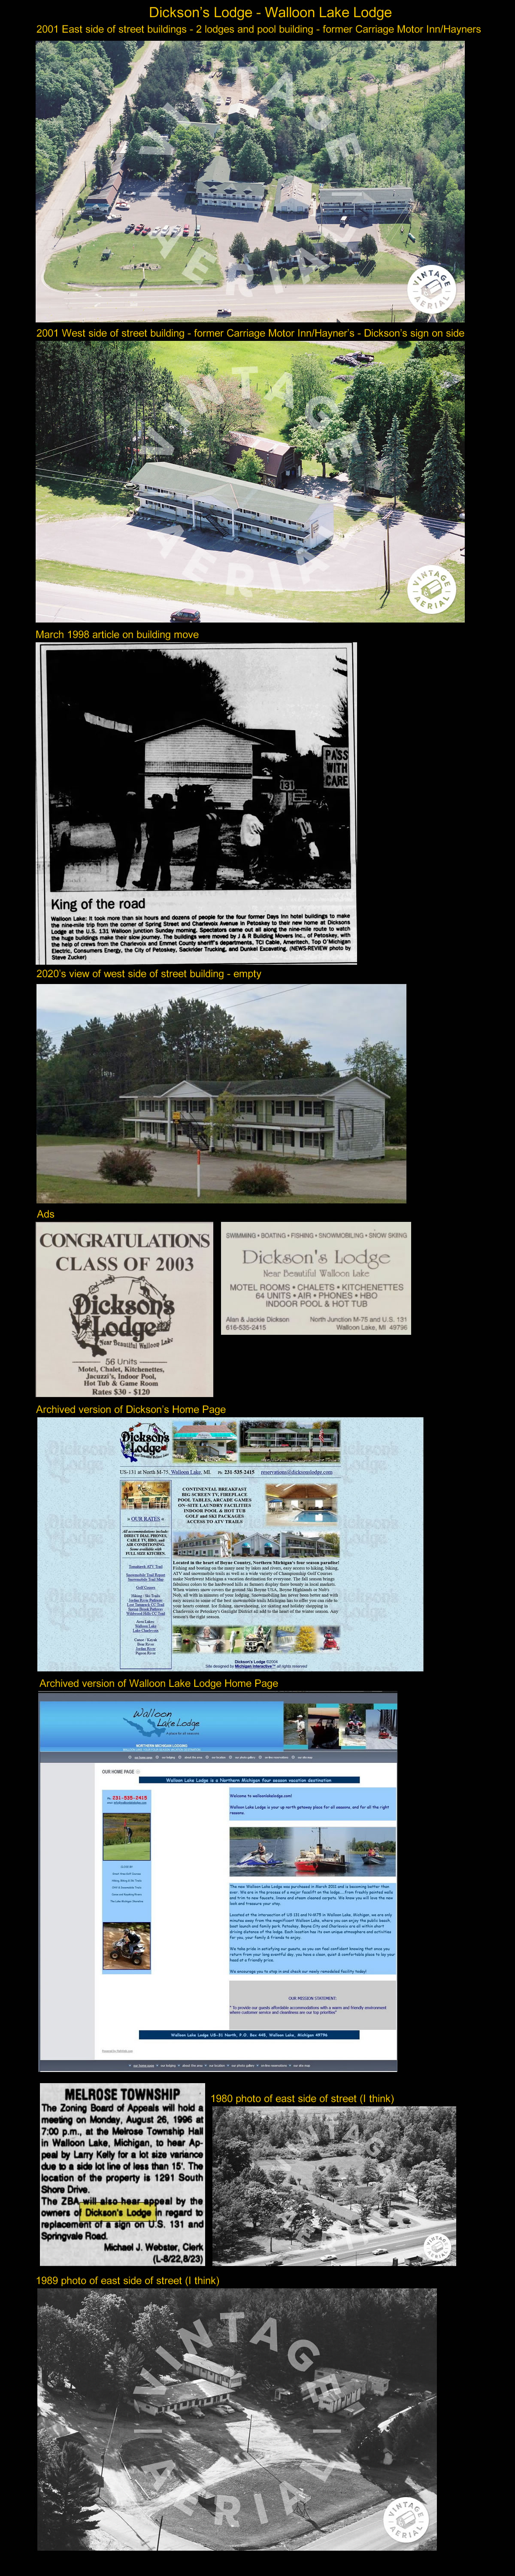 Breenes Candelight Restaurant and Motel - Dicksons Walloon Lake Lodges Historical Info